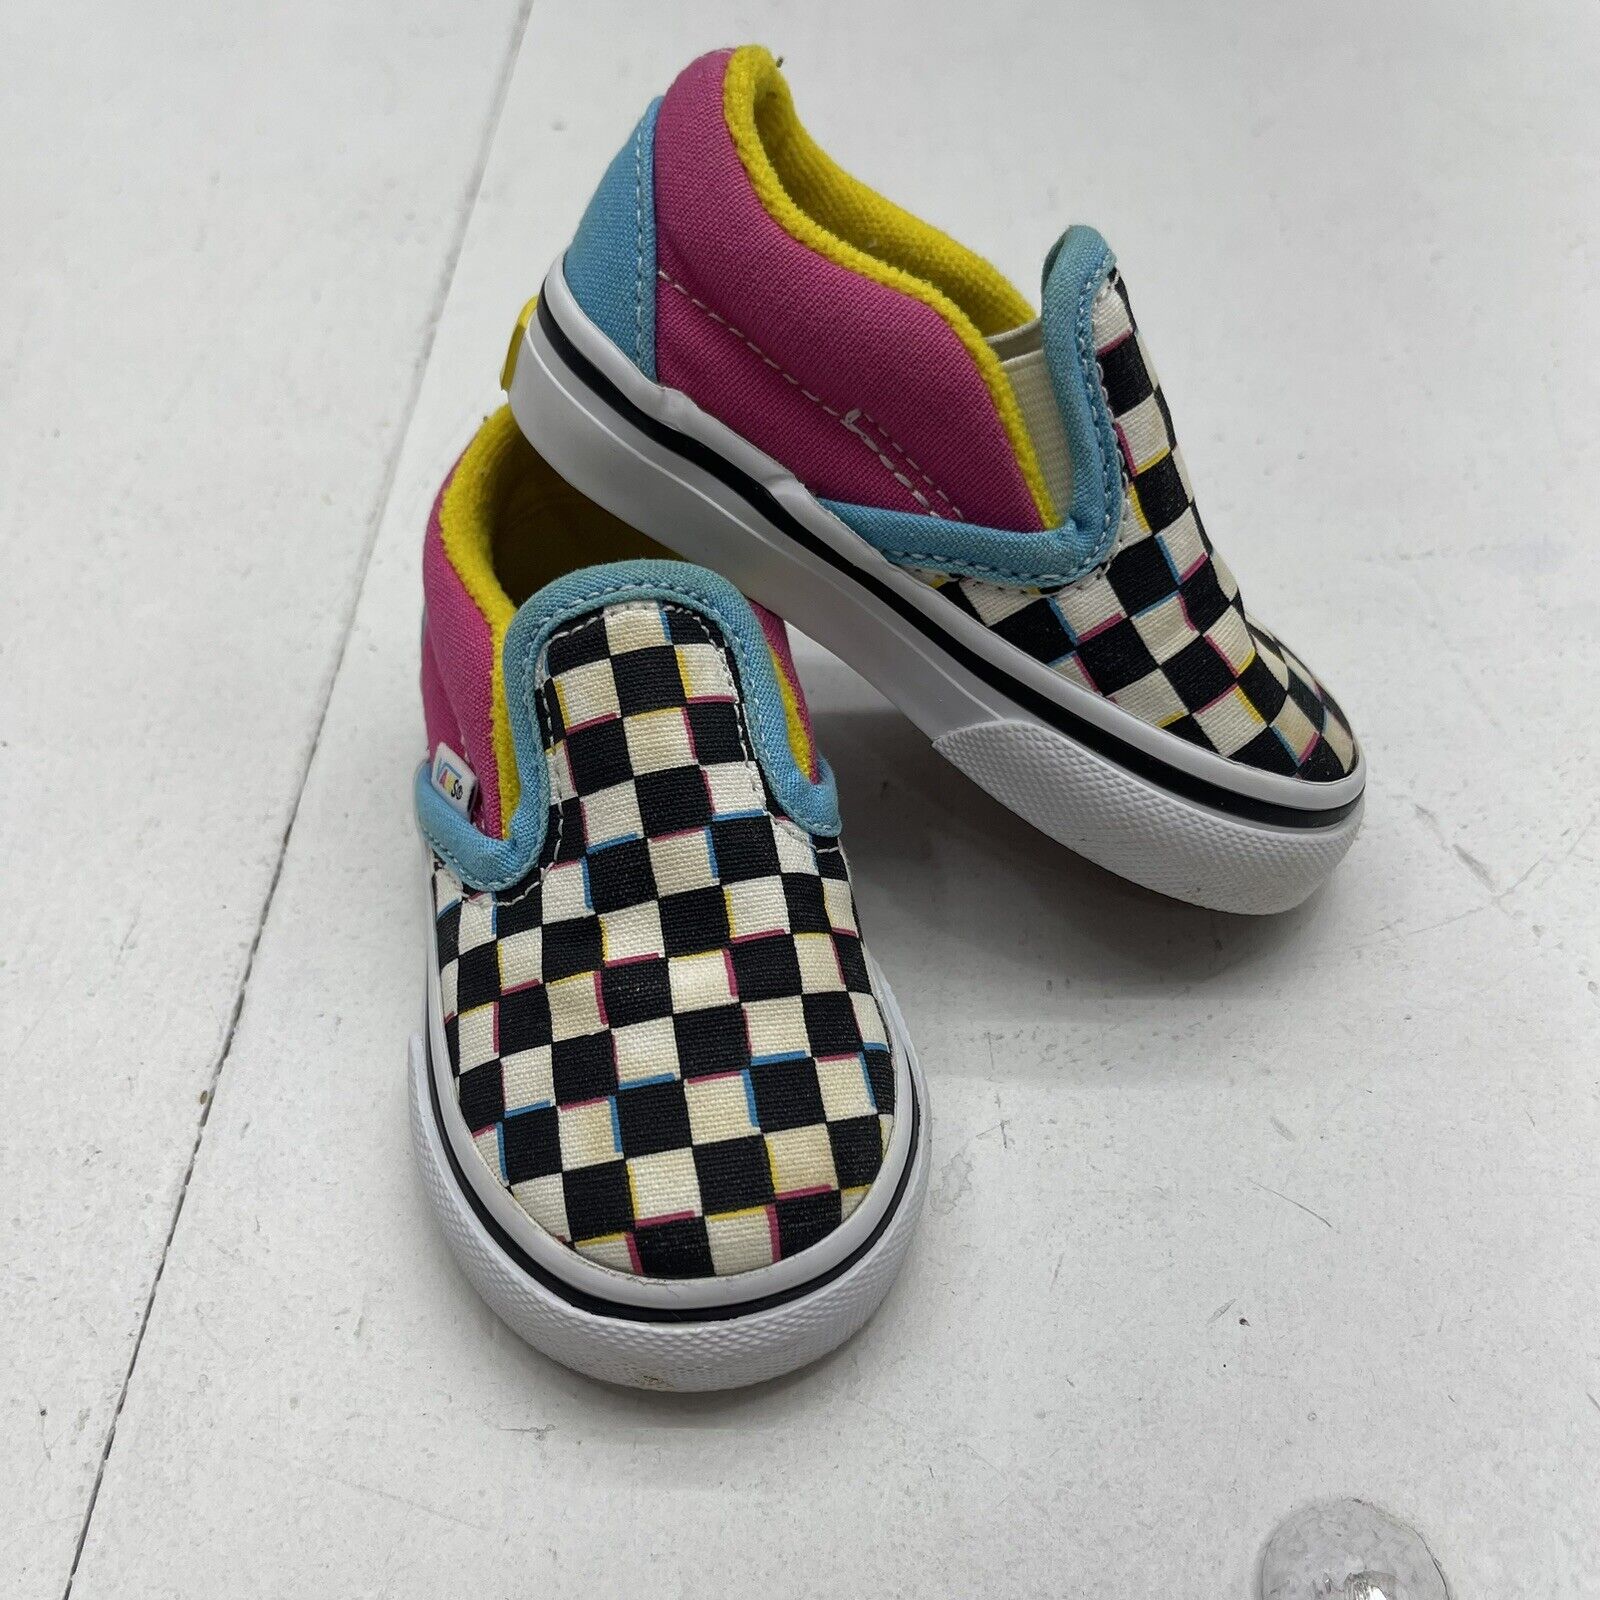 Vans Asher Rainbow Checkered Slip On Shoes Toddler Size 4